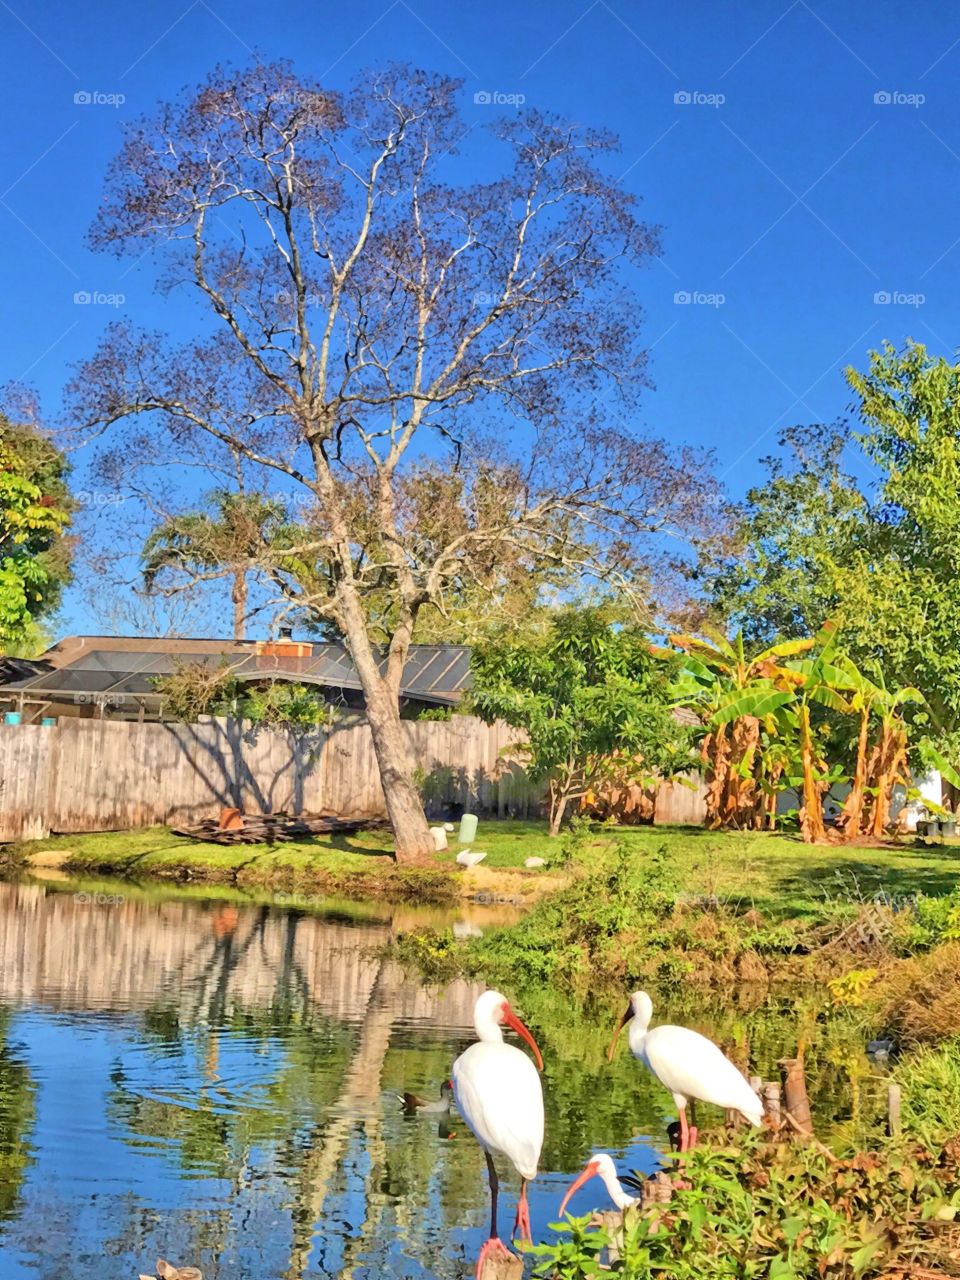 Our regular guests in the backyard, the white ibis. 